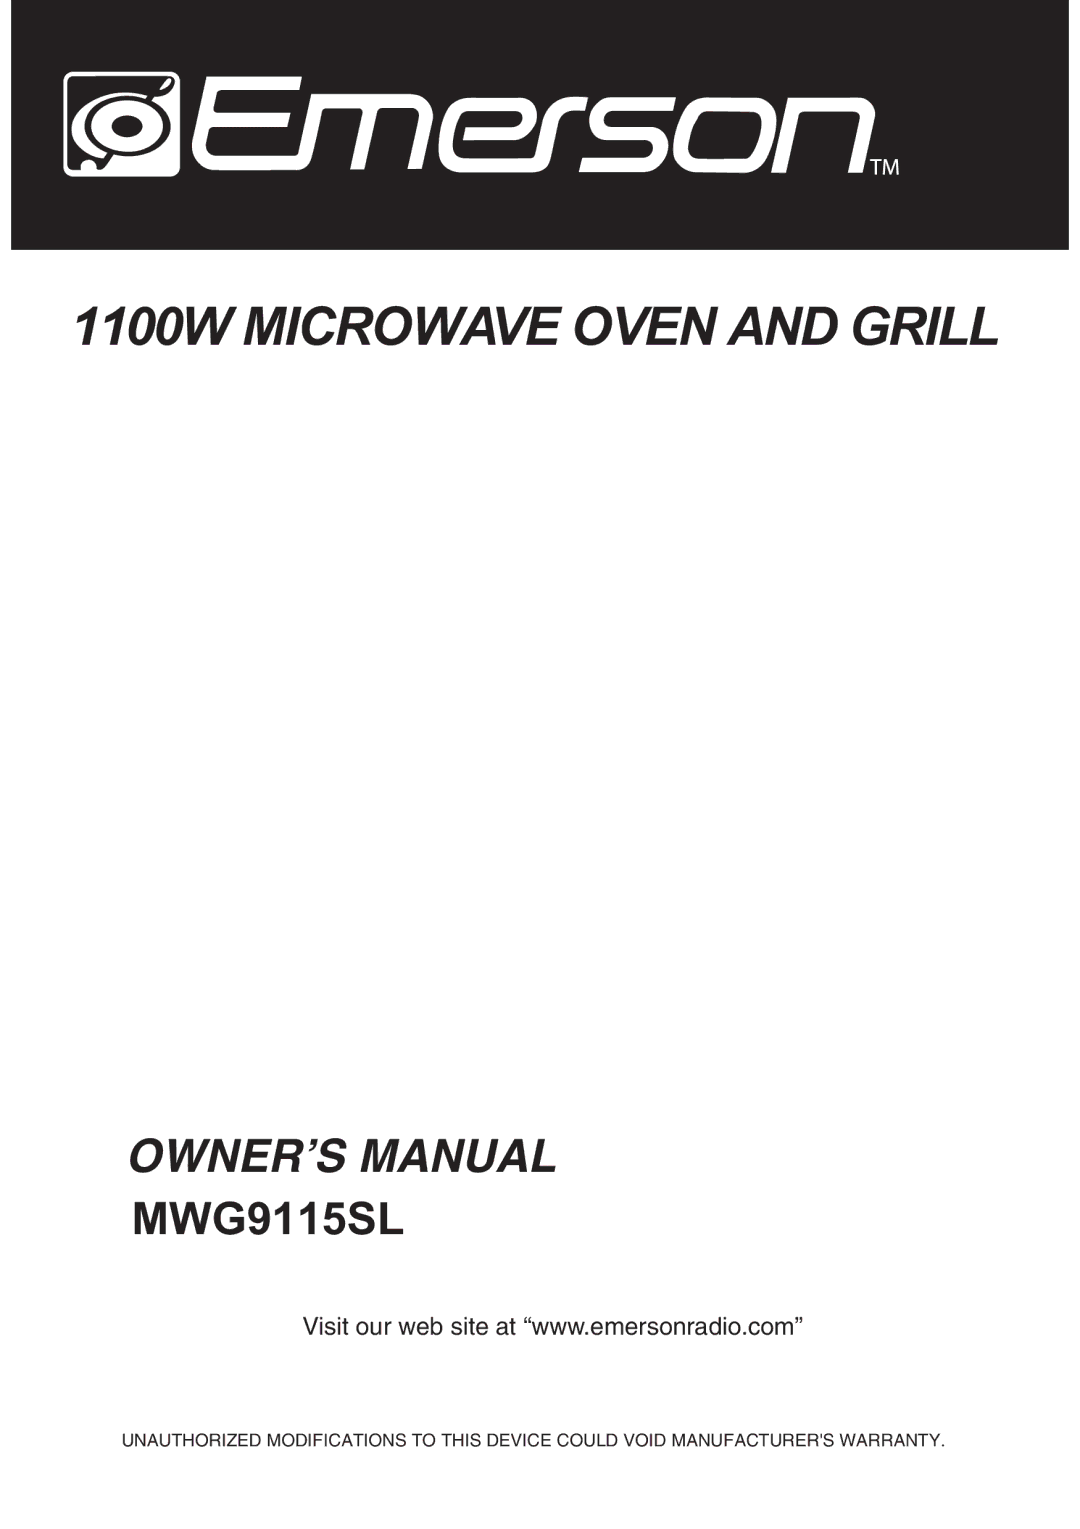 Emerson MWG9115SL owner manual 1100W Microwave Oven and Grill 